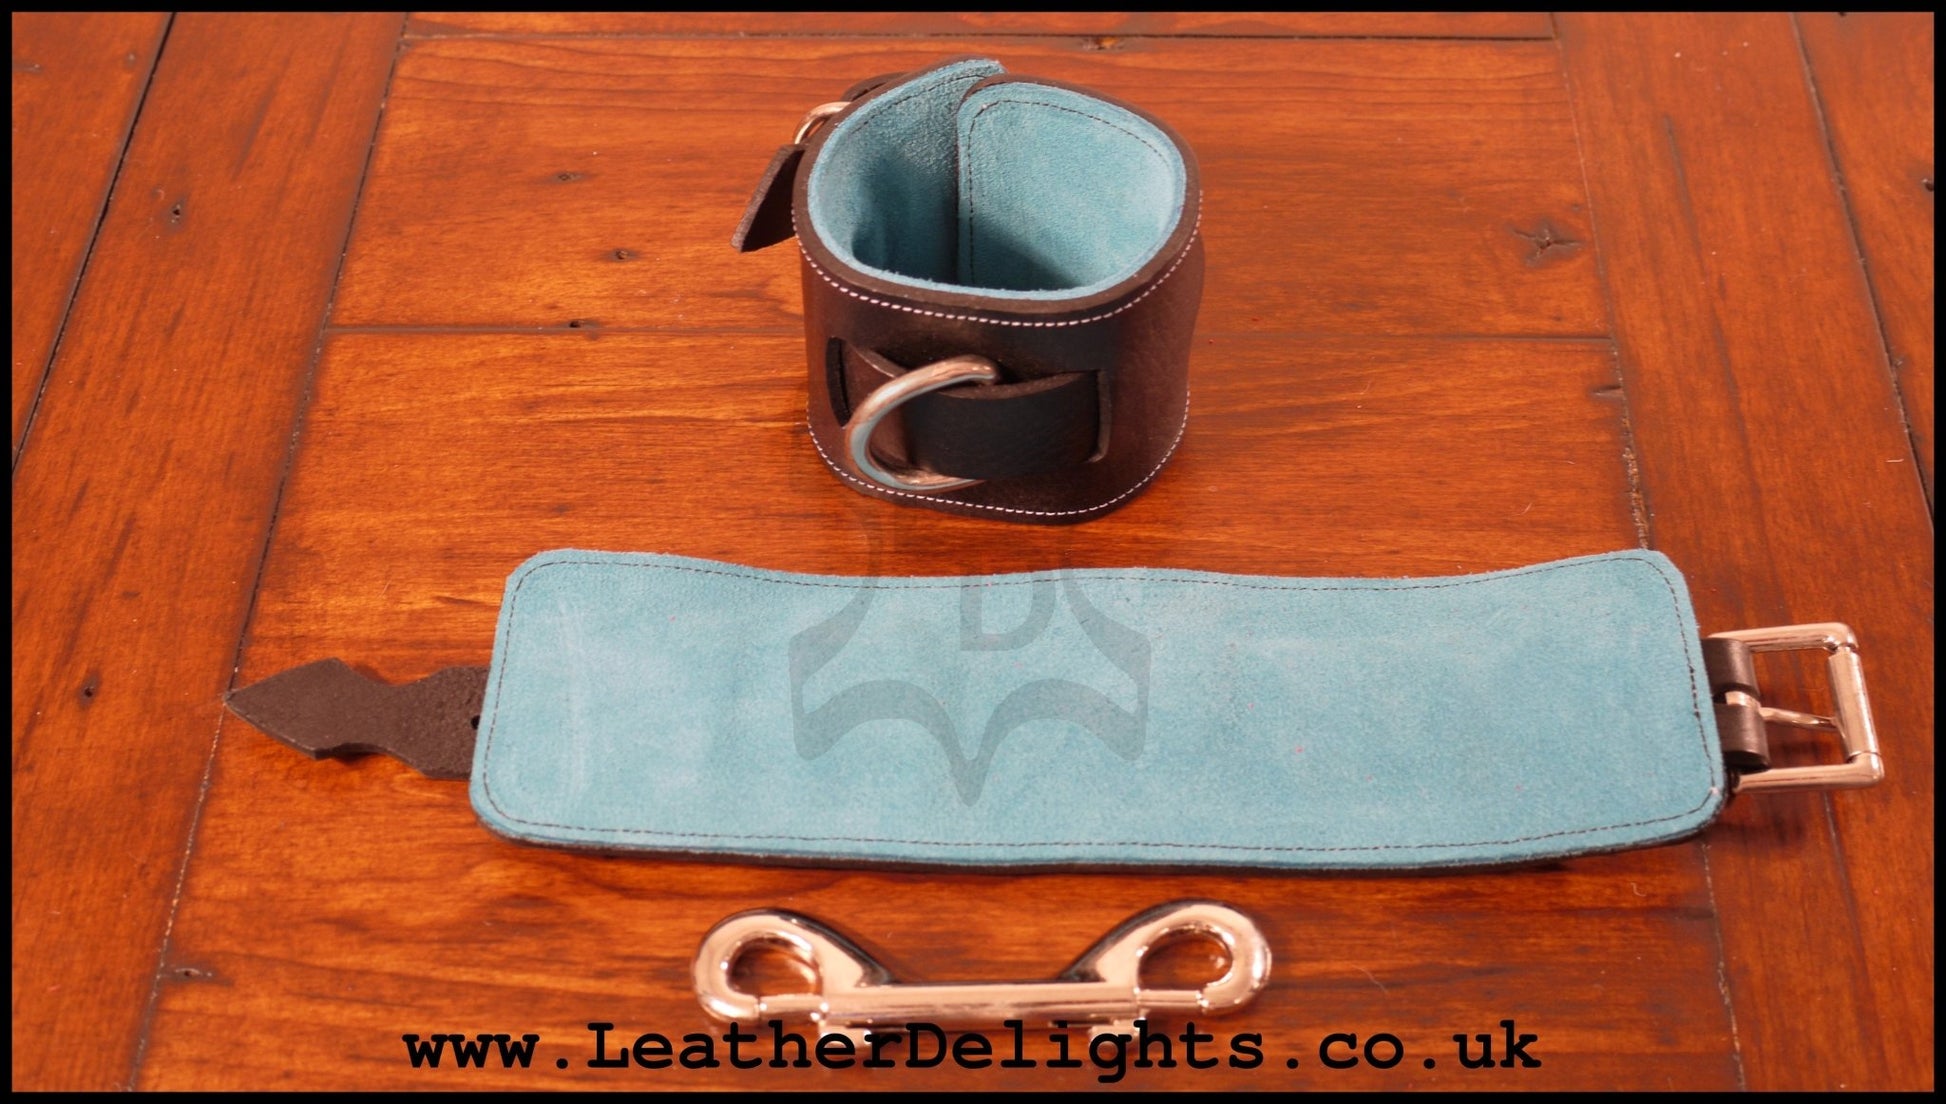 Black Wrist Cuffs with Suede Lining - Leather Delights